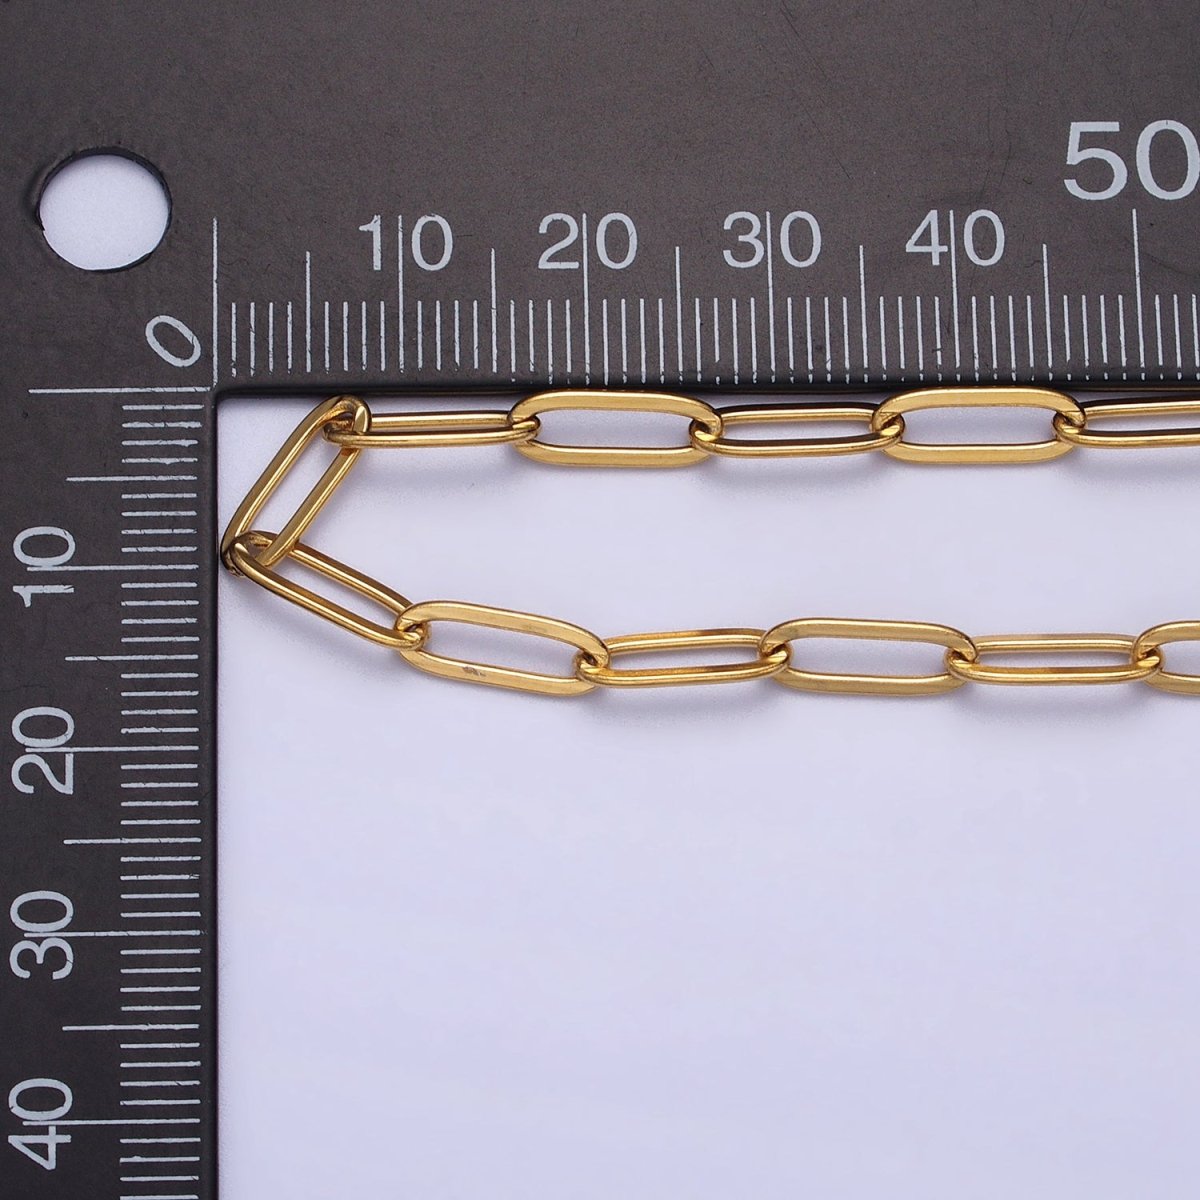 Dainty Gold Paperclip Link Chain Necklace Elongated Chain Necklace Stainless Steel Chain 17.7 inch Long | WA-1623 WA-1624 Clearance Pricing - DLUXCA